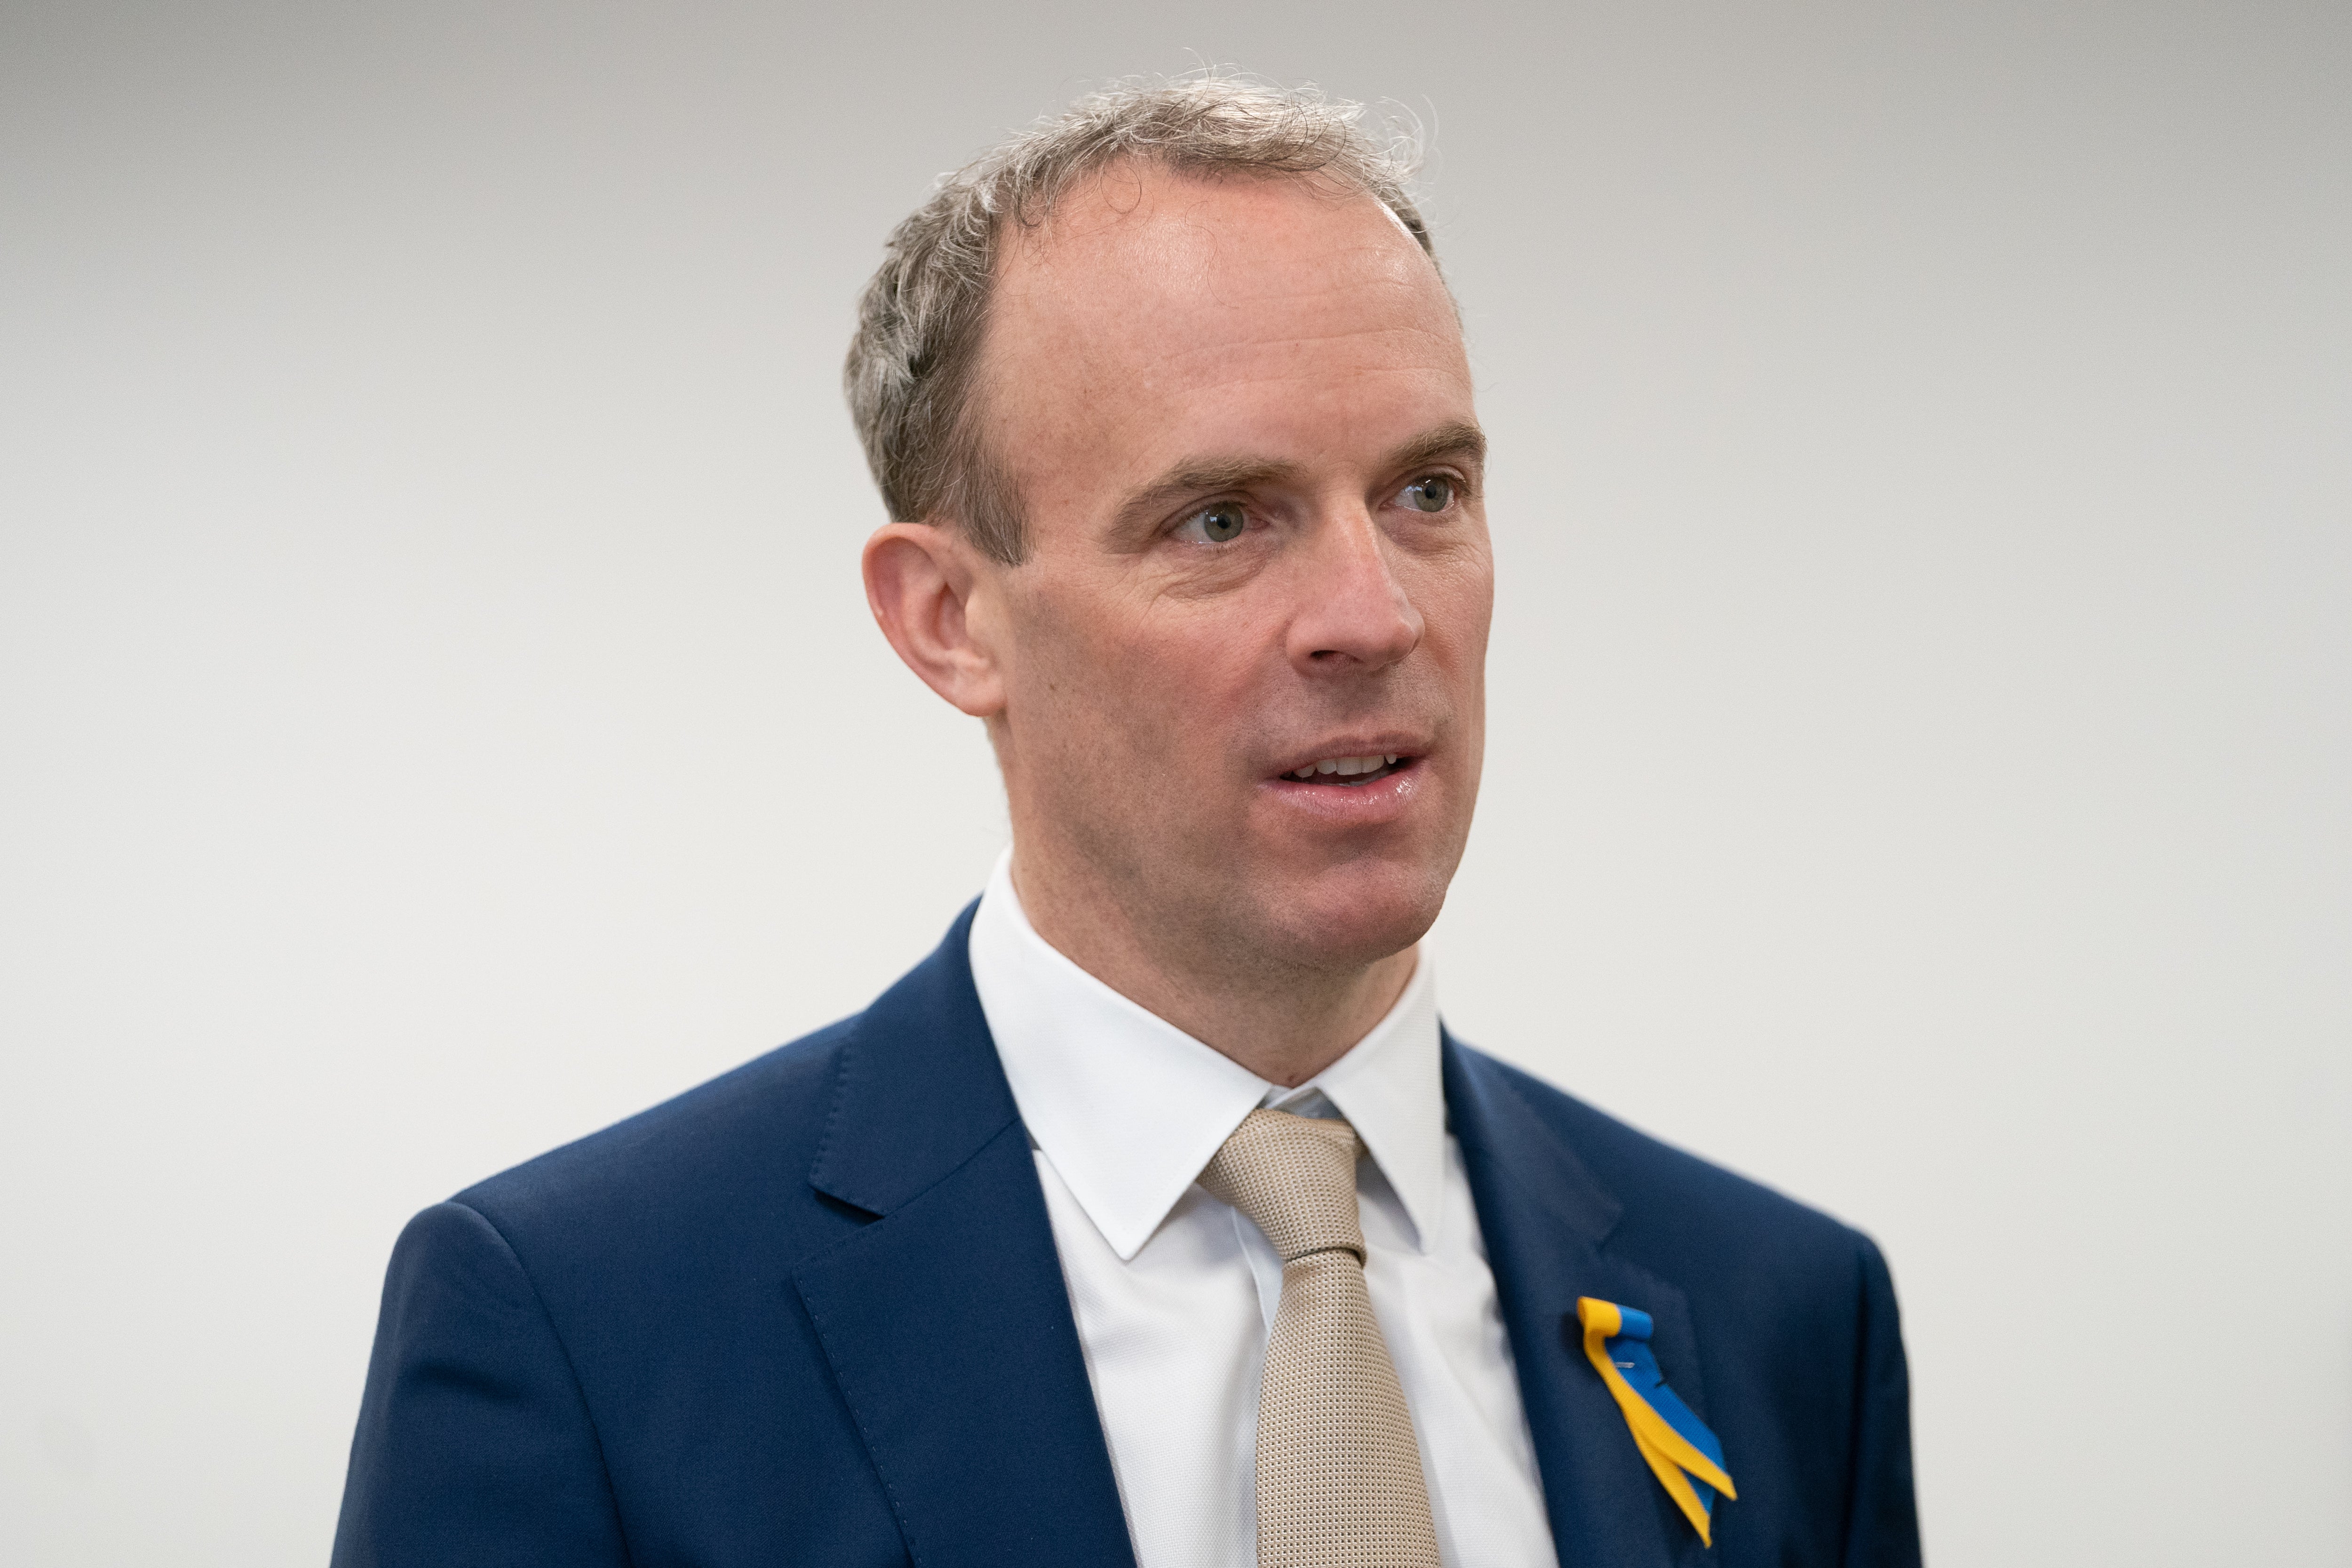 Deputy Prime Minister and Justice Secretary Dominic Raab opens category C prison HMP Five Wells in Wellingborough. Picture date: Thursday March 3, 2022.